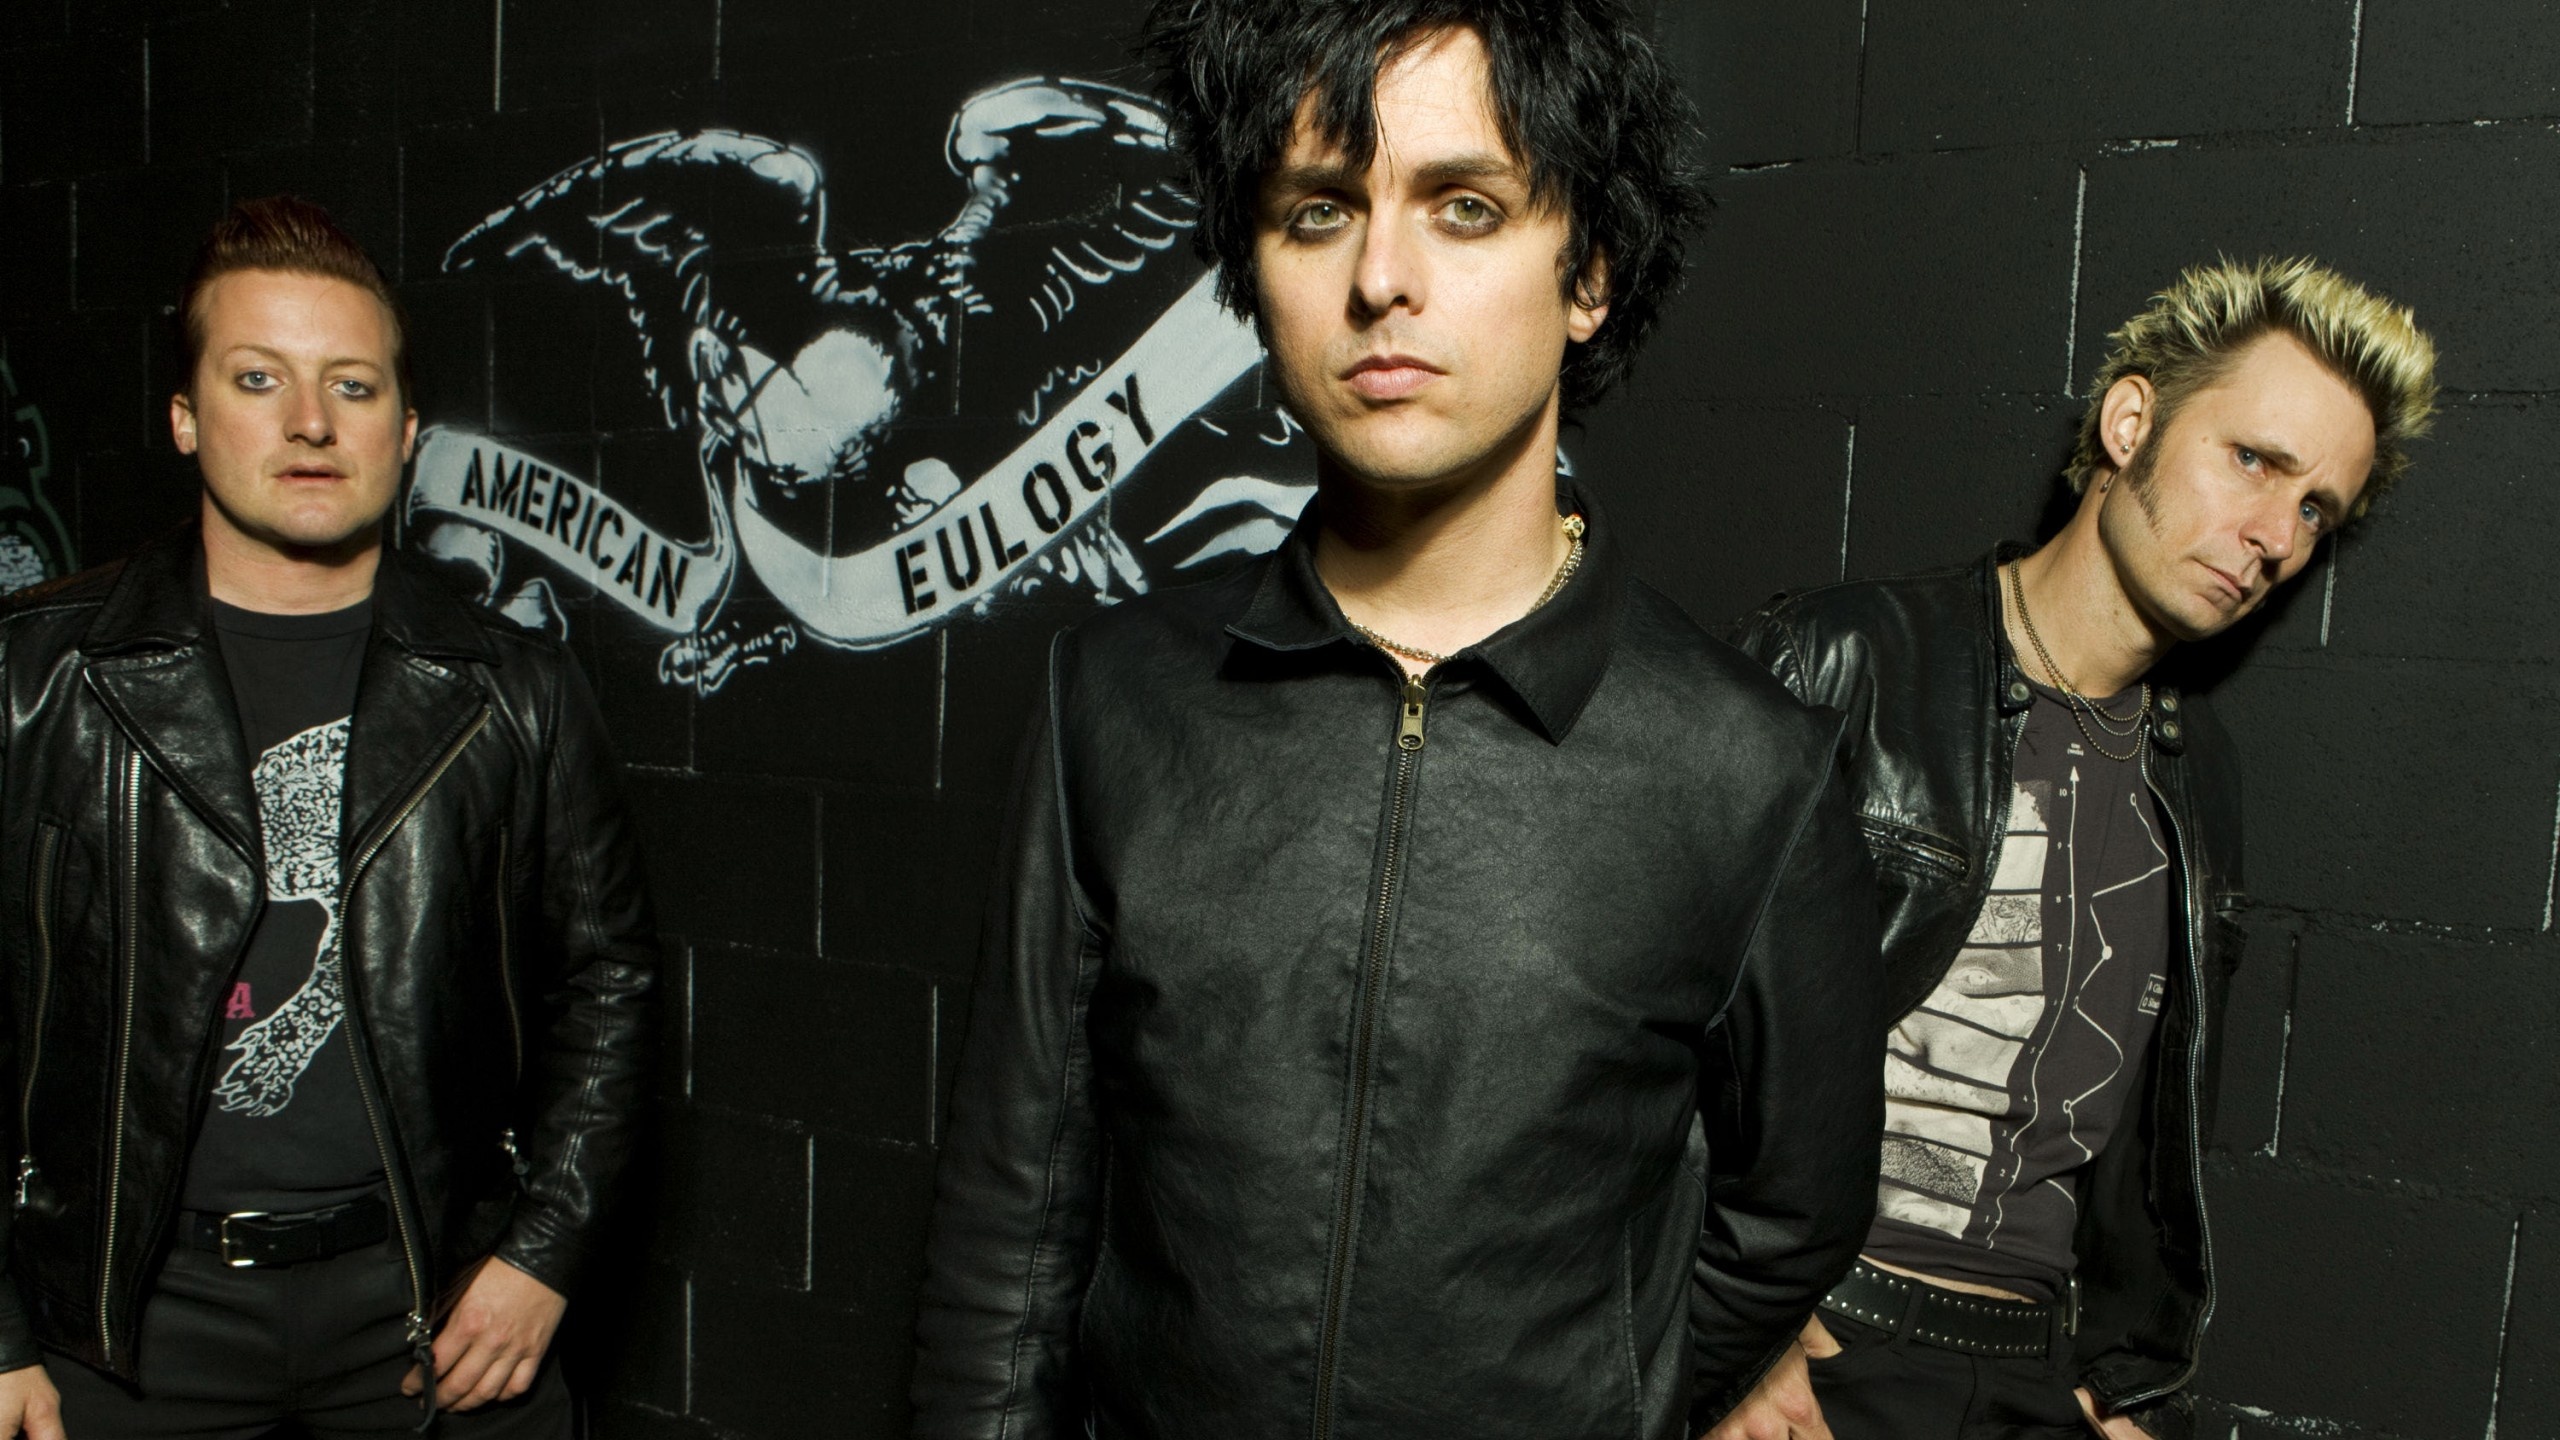 Green Day (Band): The group that has been nominated for 20 Grammy awards and has won five of them. 2560x1440 HD Wallpaper.